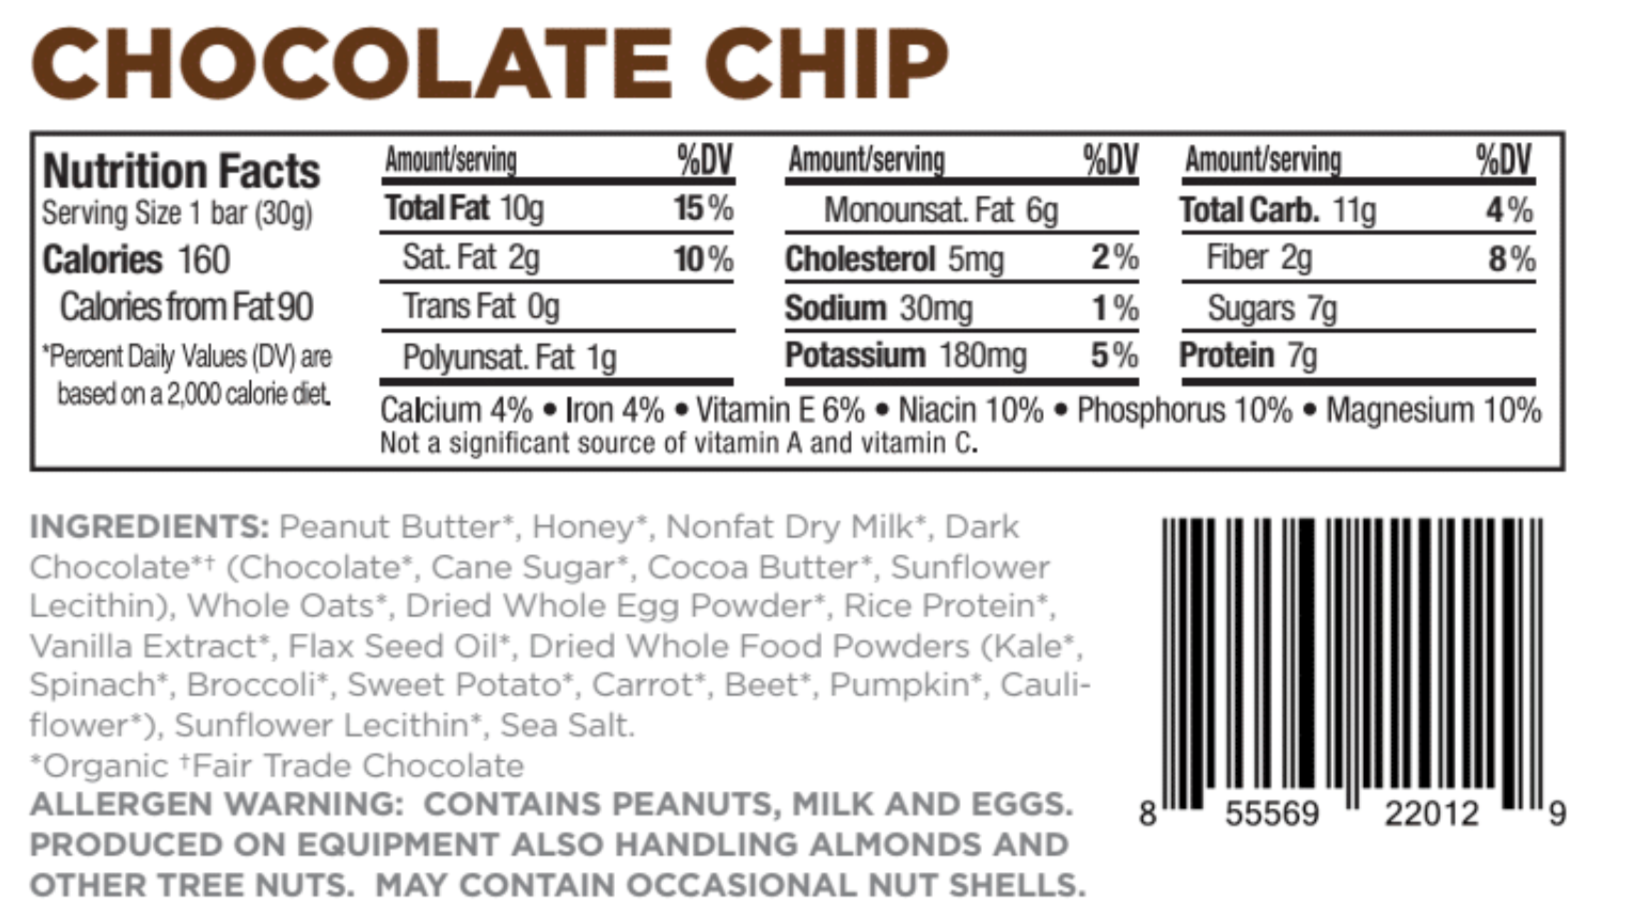 Chocolate Chip Nutrition & Ingredients